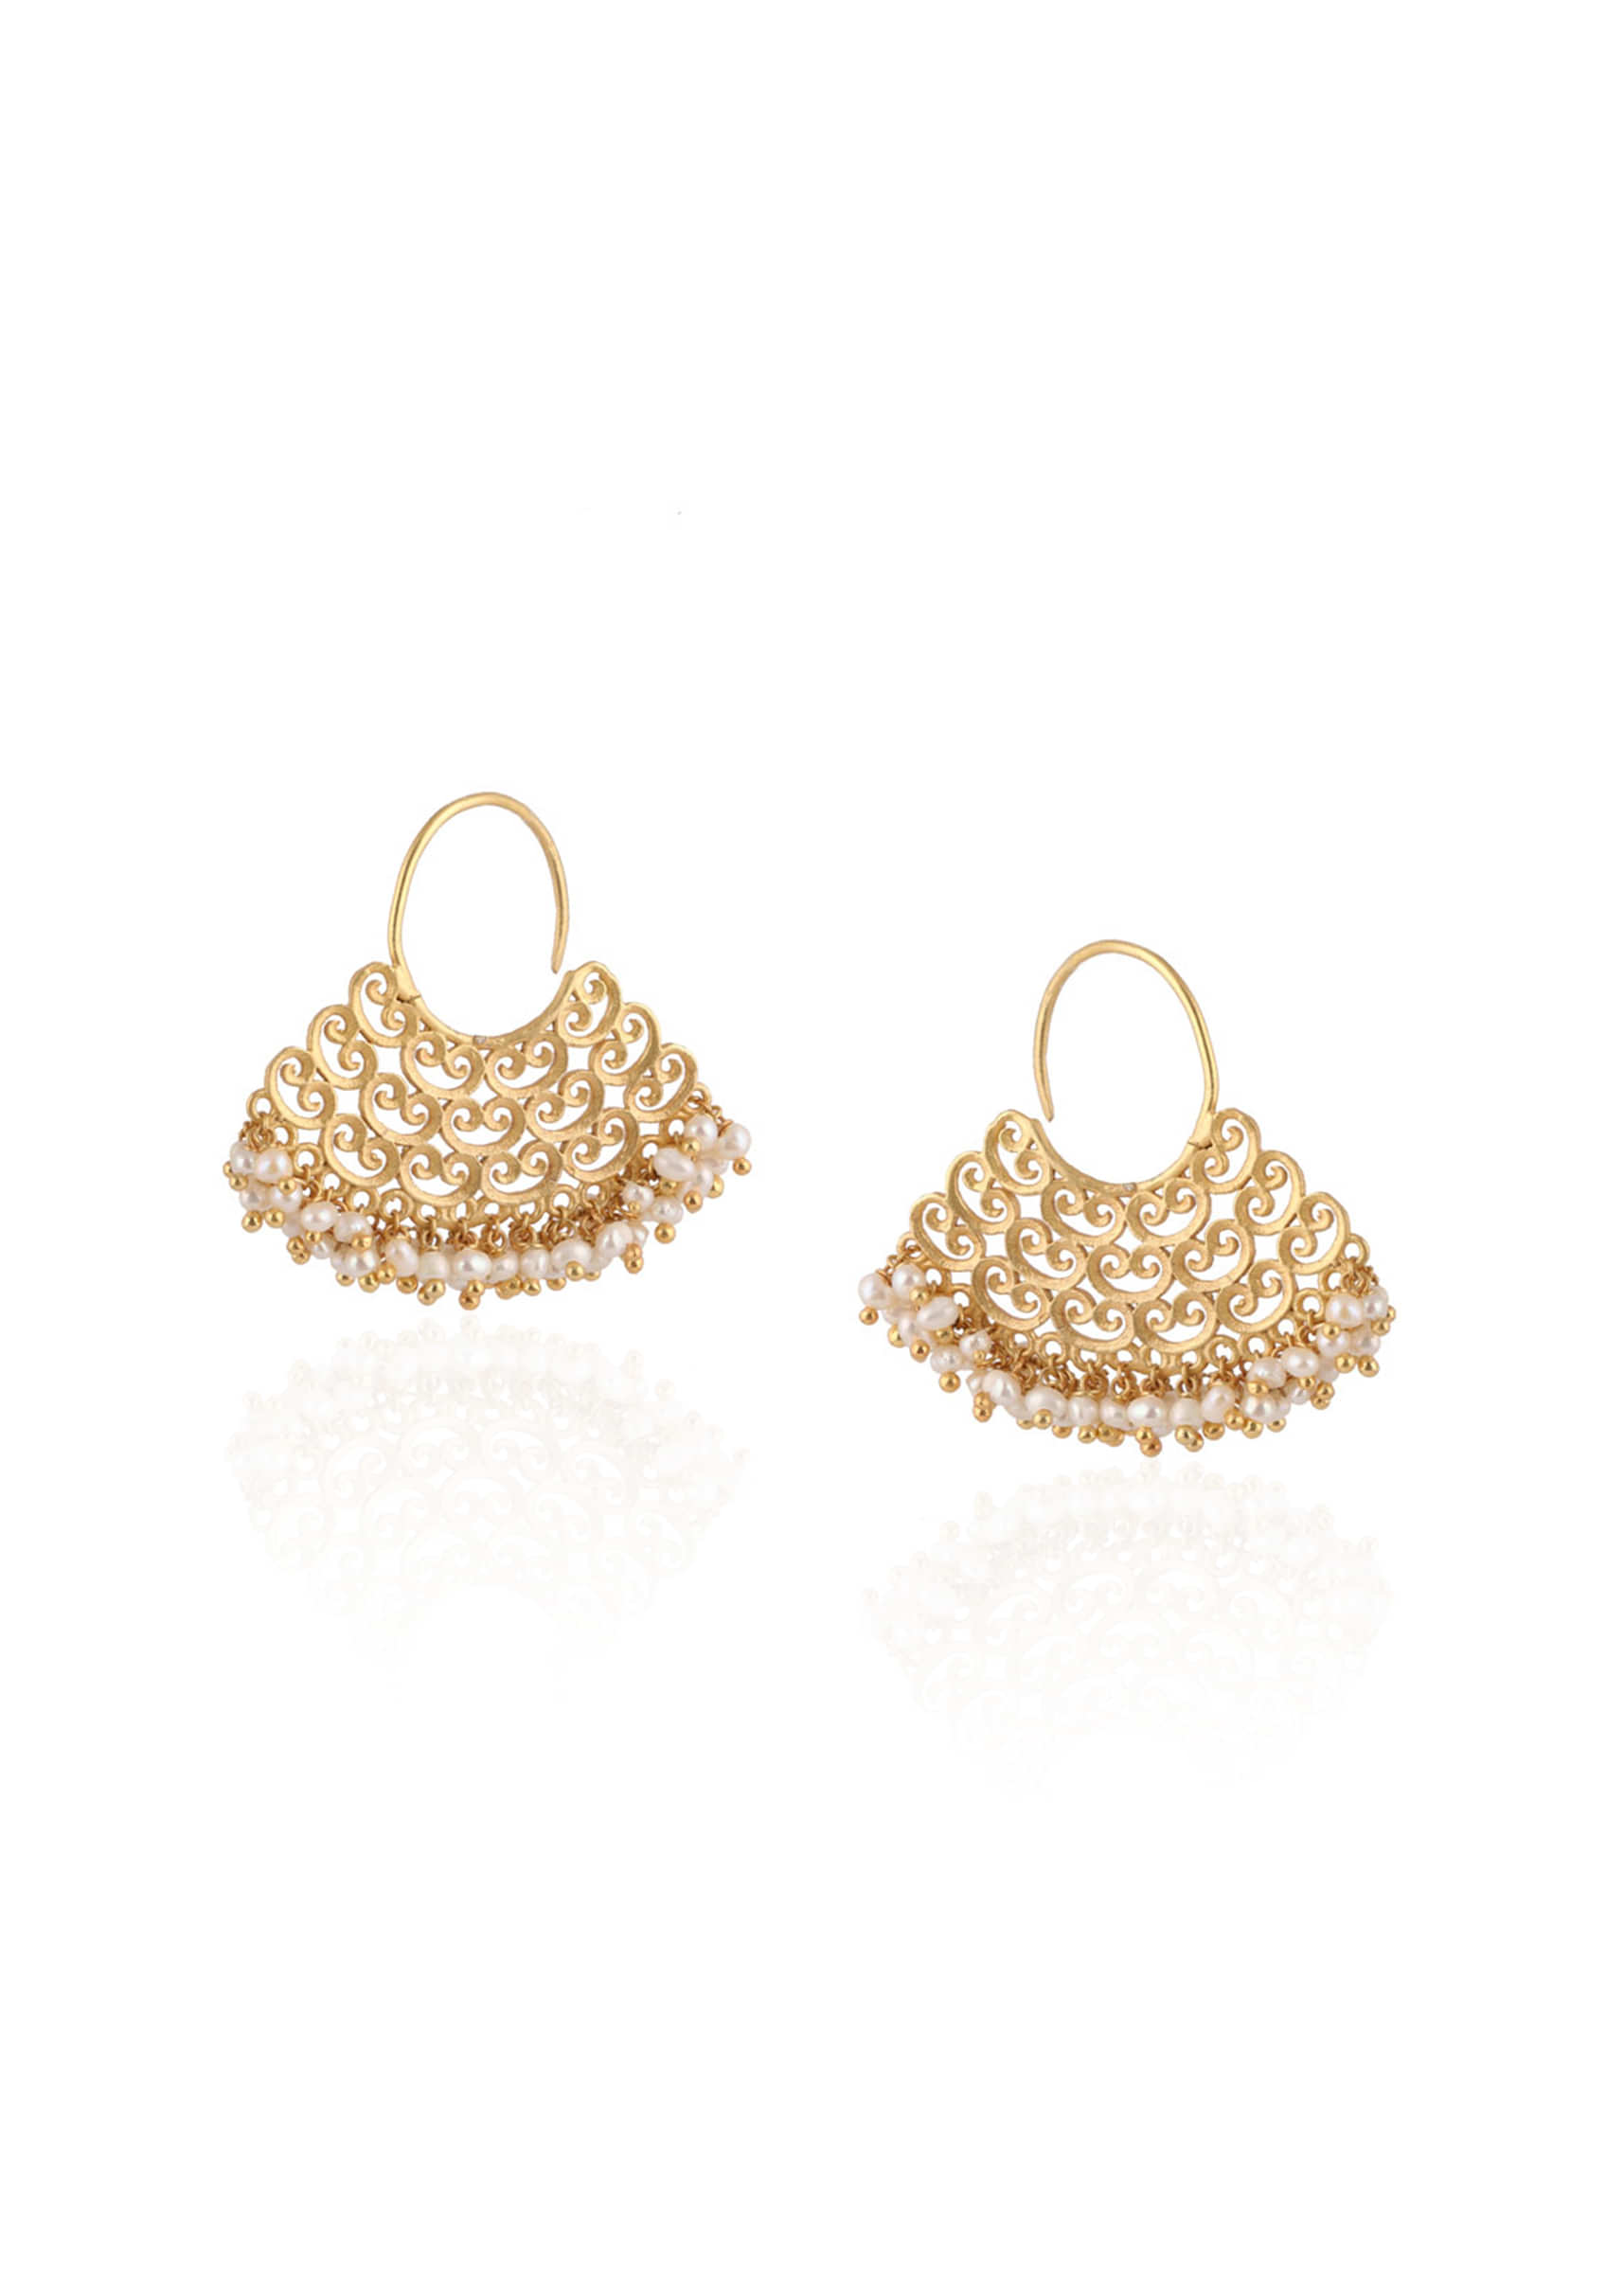 Gold Plated Earrings With Filigree Design Lined In Pearls By Zariin